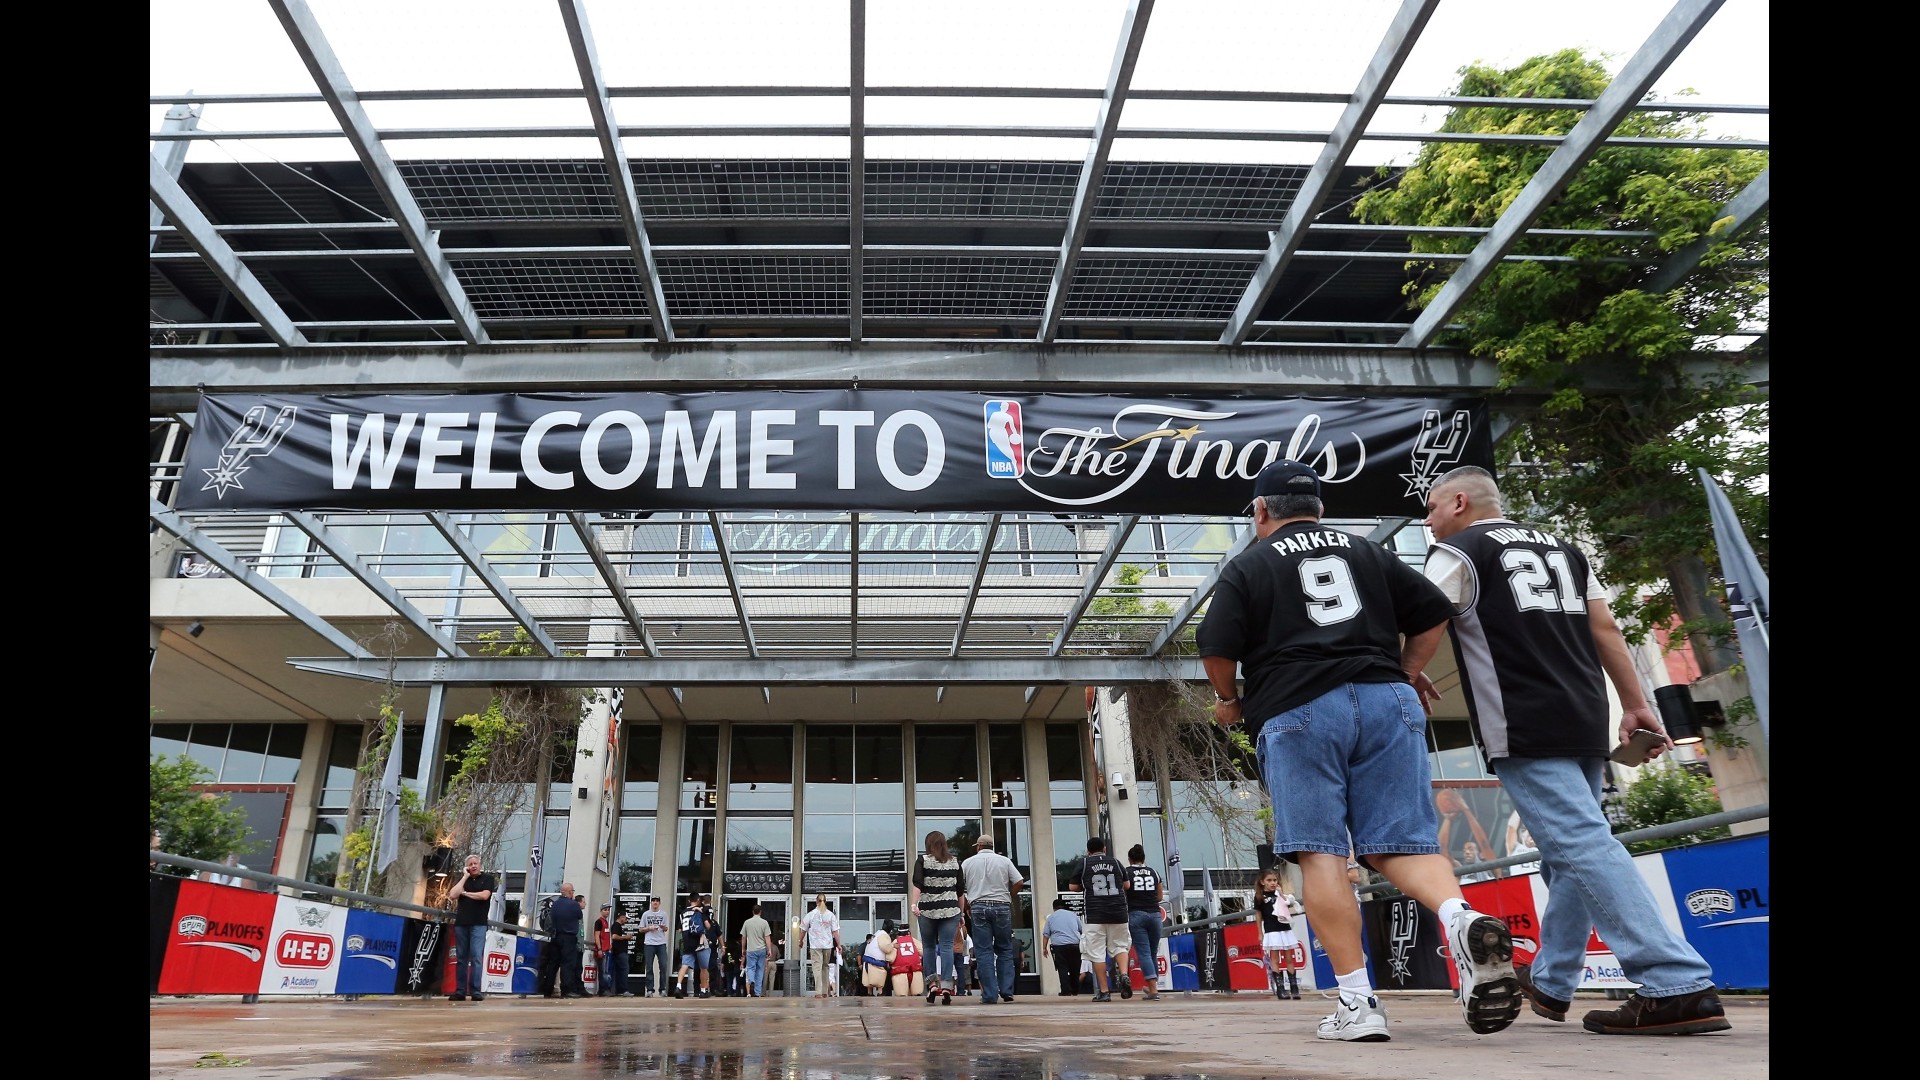 Spurs are shopping for brands to replace AT&T Center name